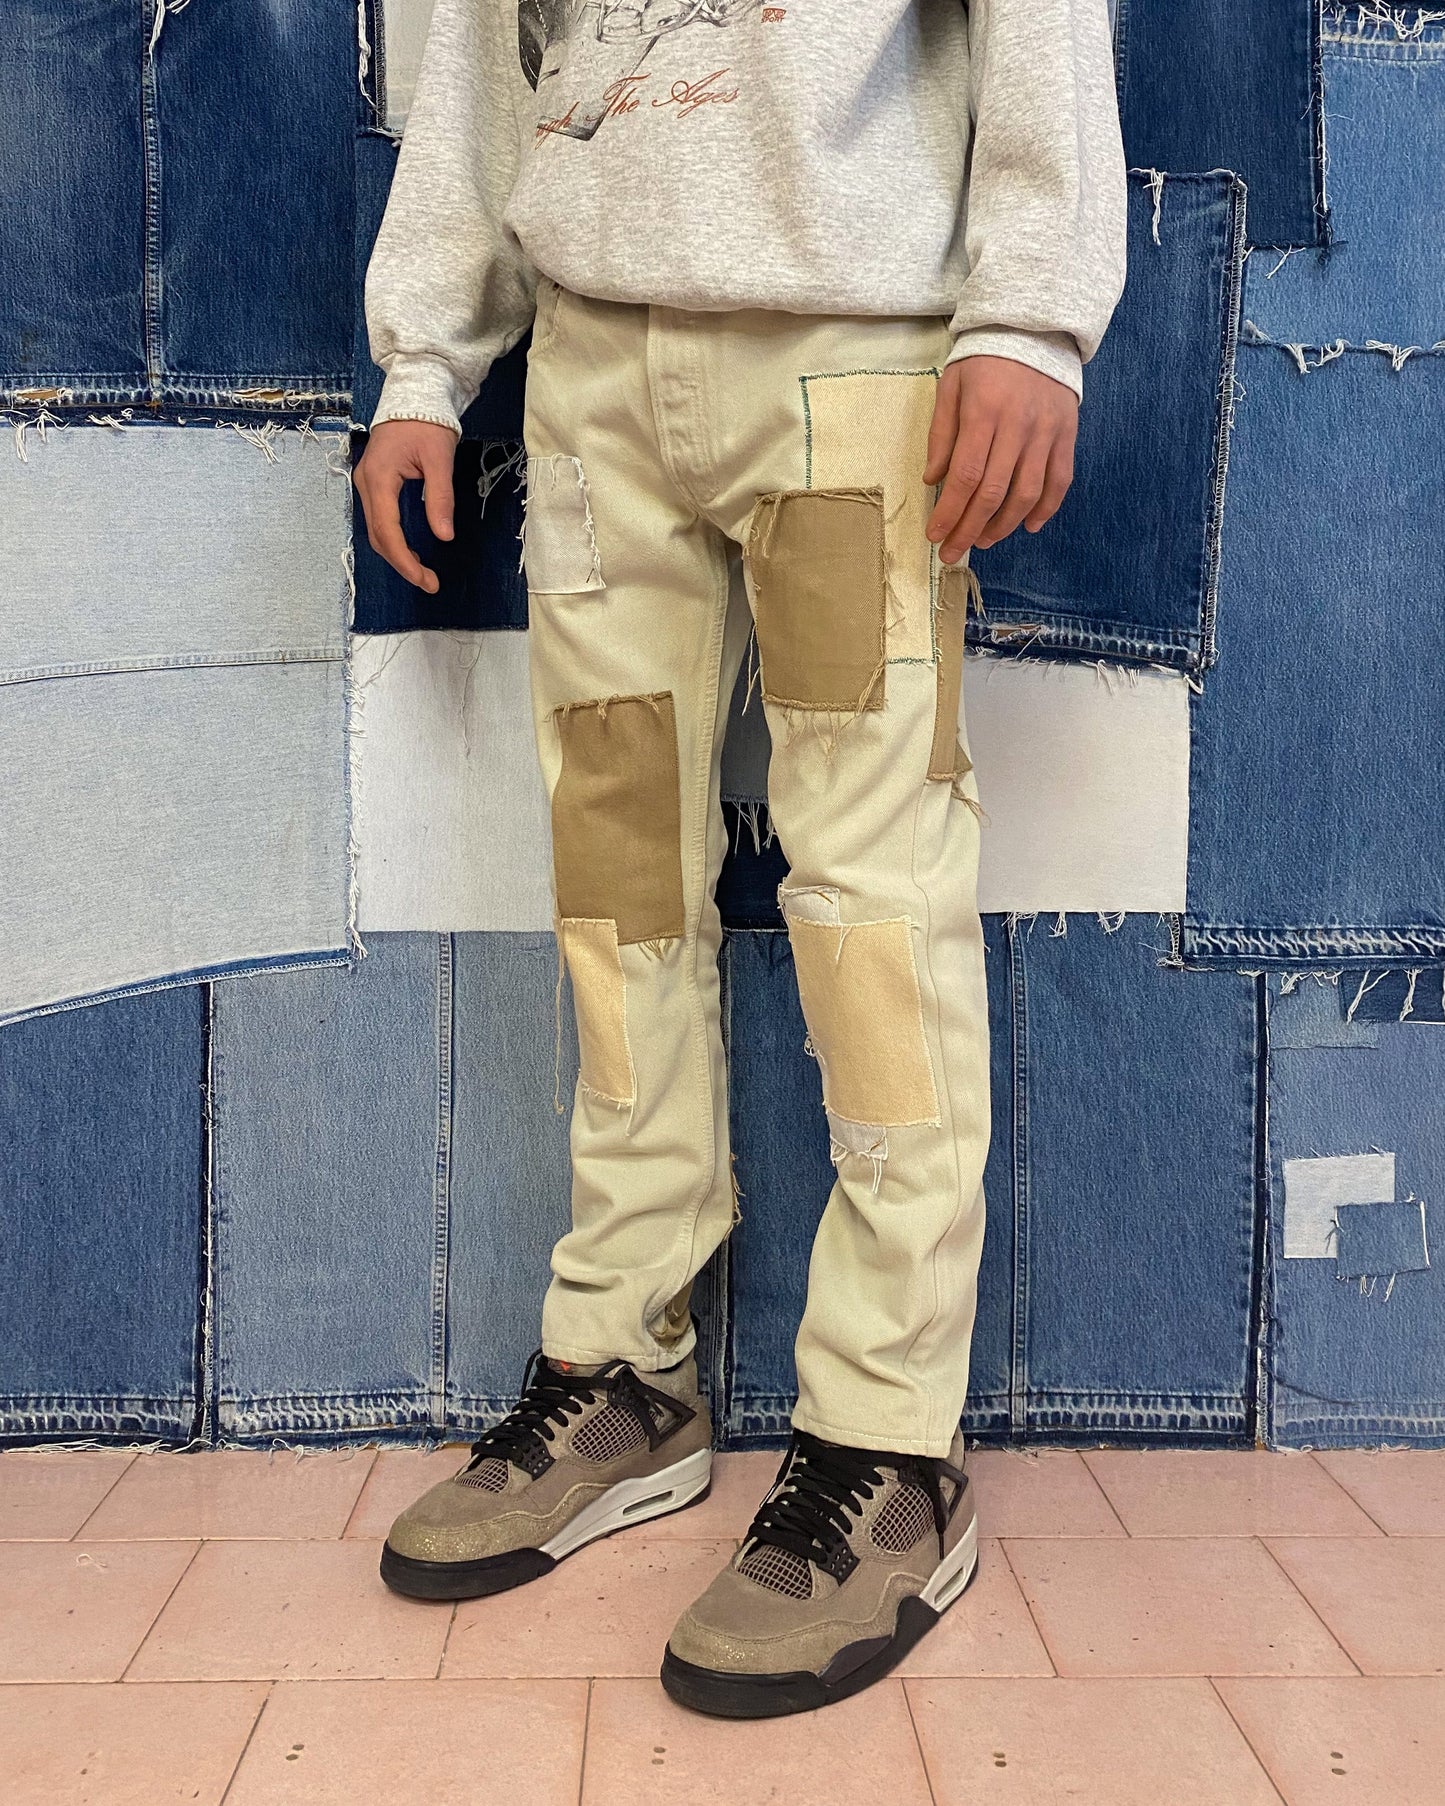 PATCHED JEANS V1 - Nicolò Puccini